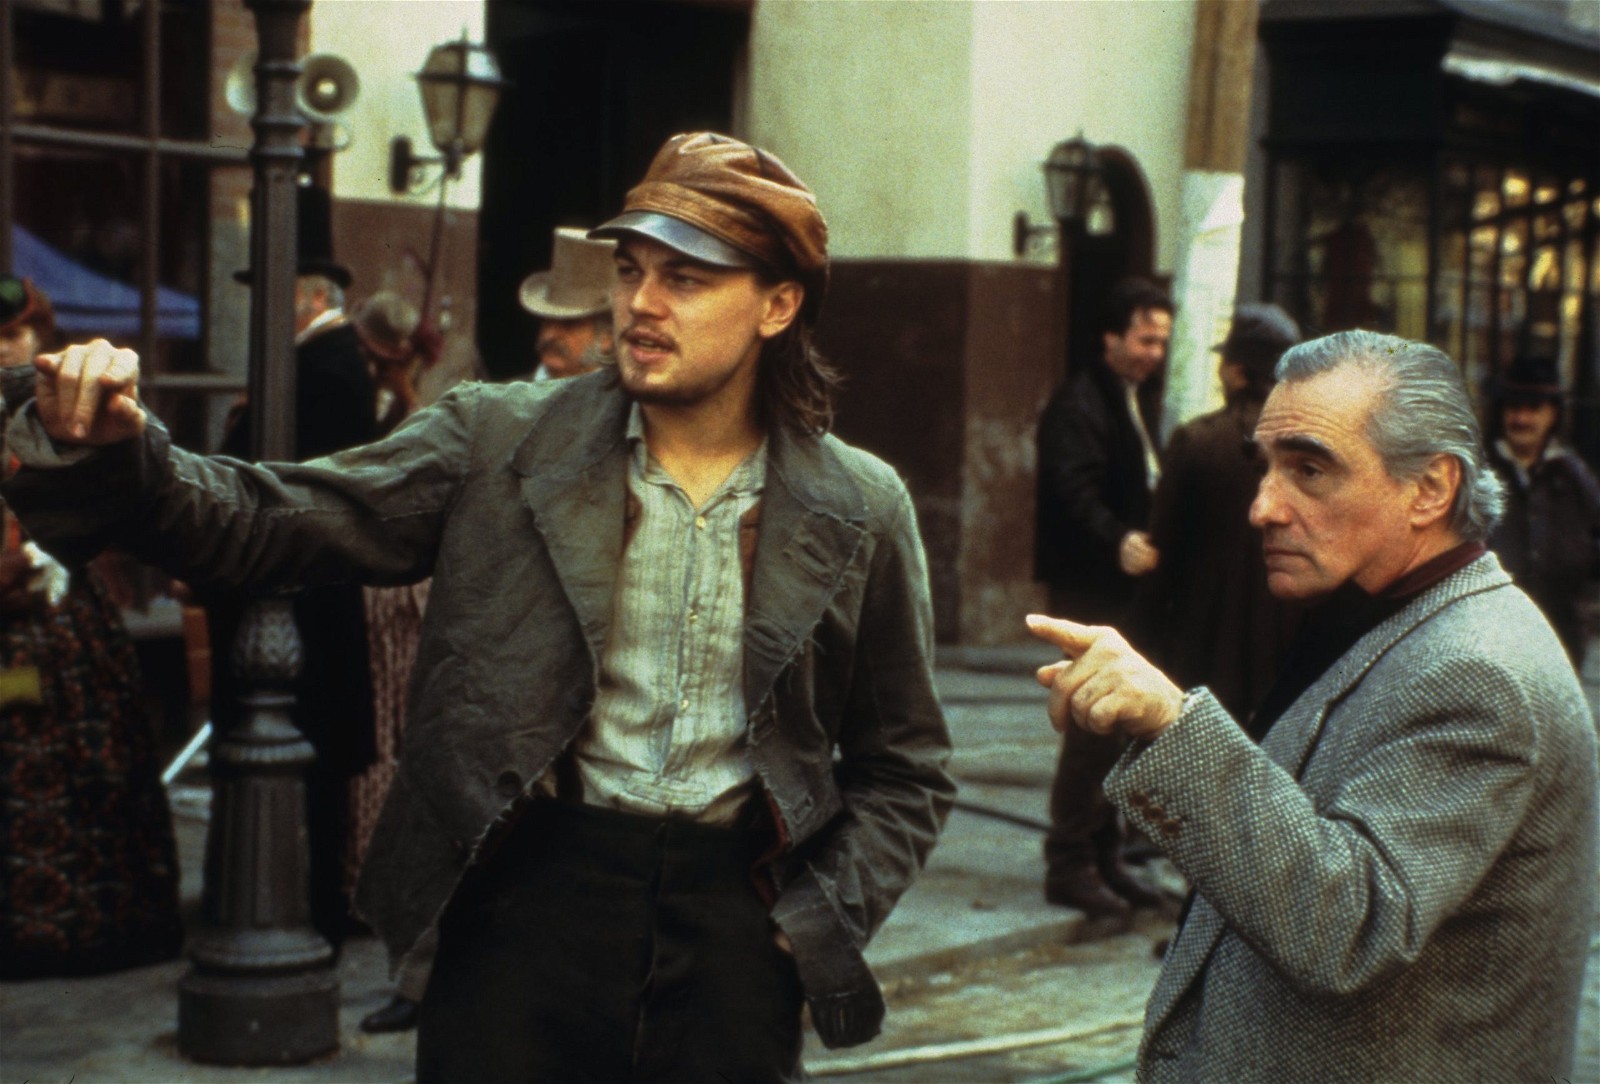 On the set of Gangs of New York